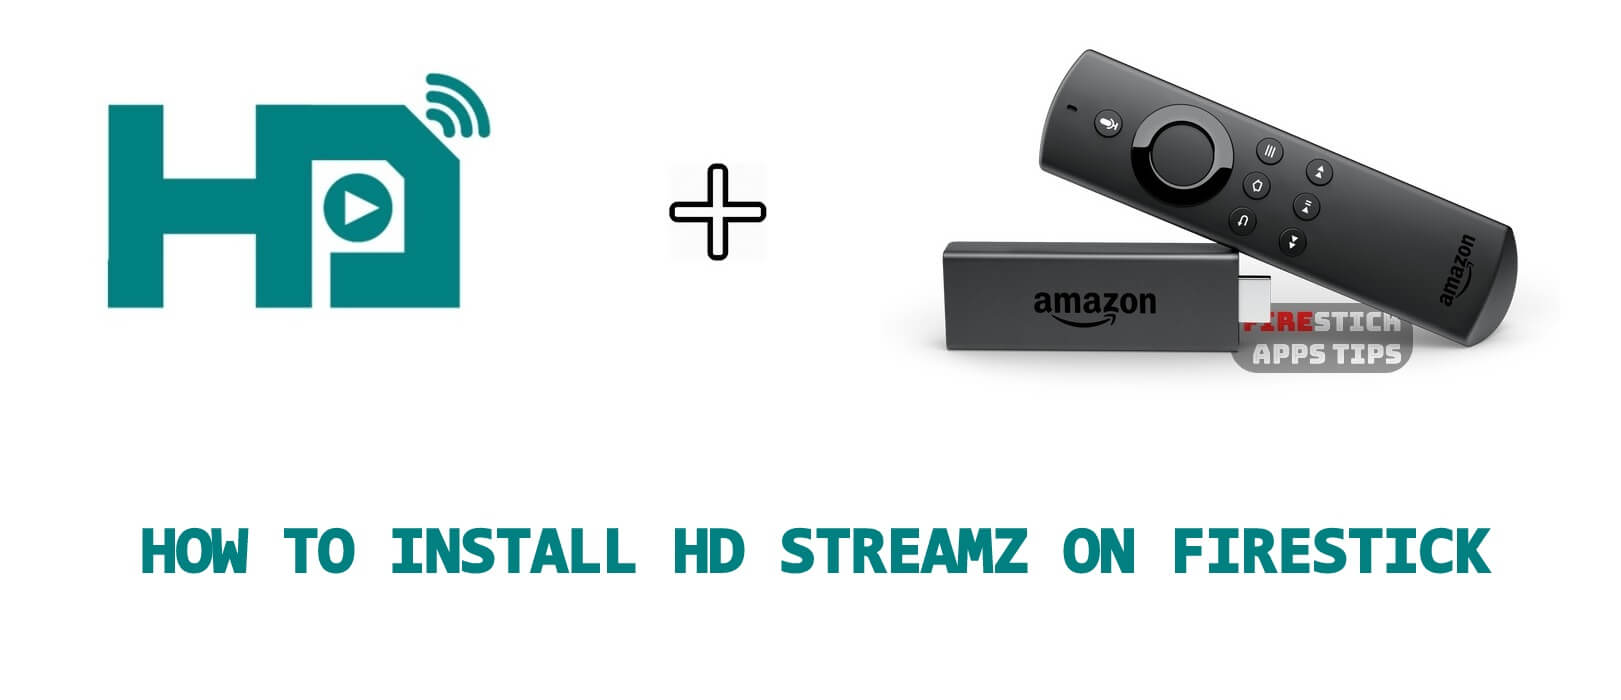 How to Download & Install HD Streamz on Firestick [2021]